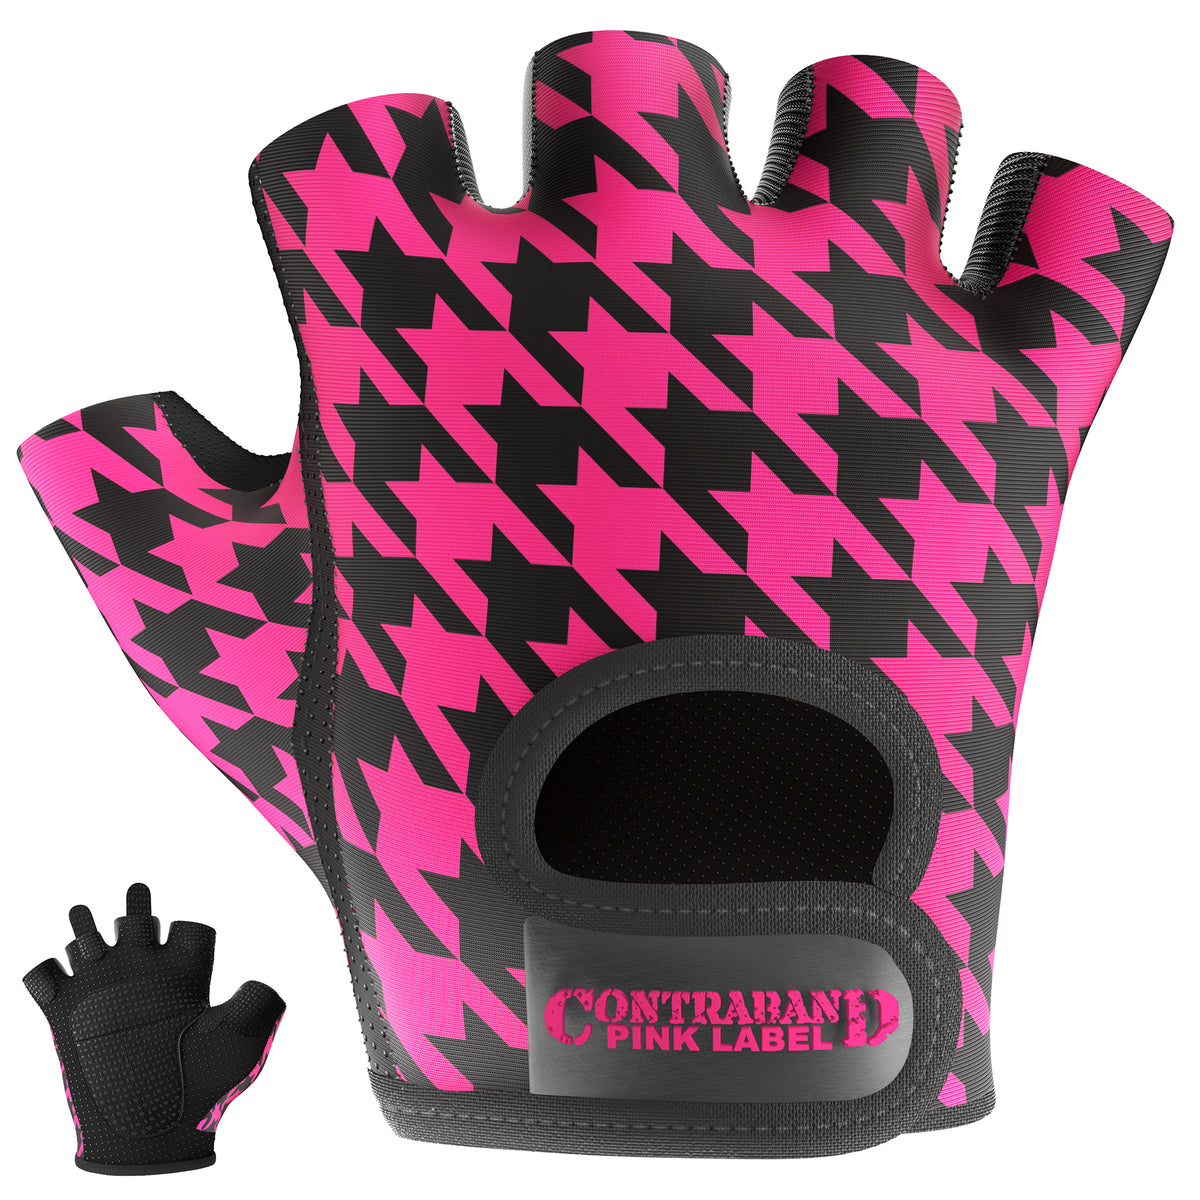 Contraband Pink Label 5257 Womens Design Series Houndstooth Print Lifting Gloves (Pair)